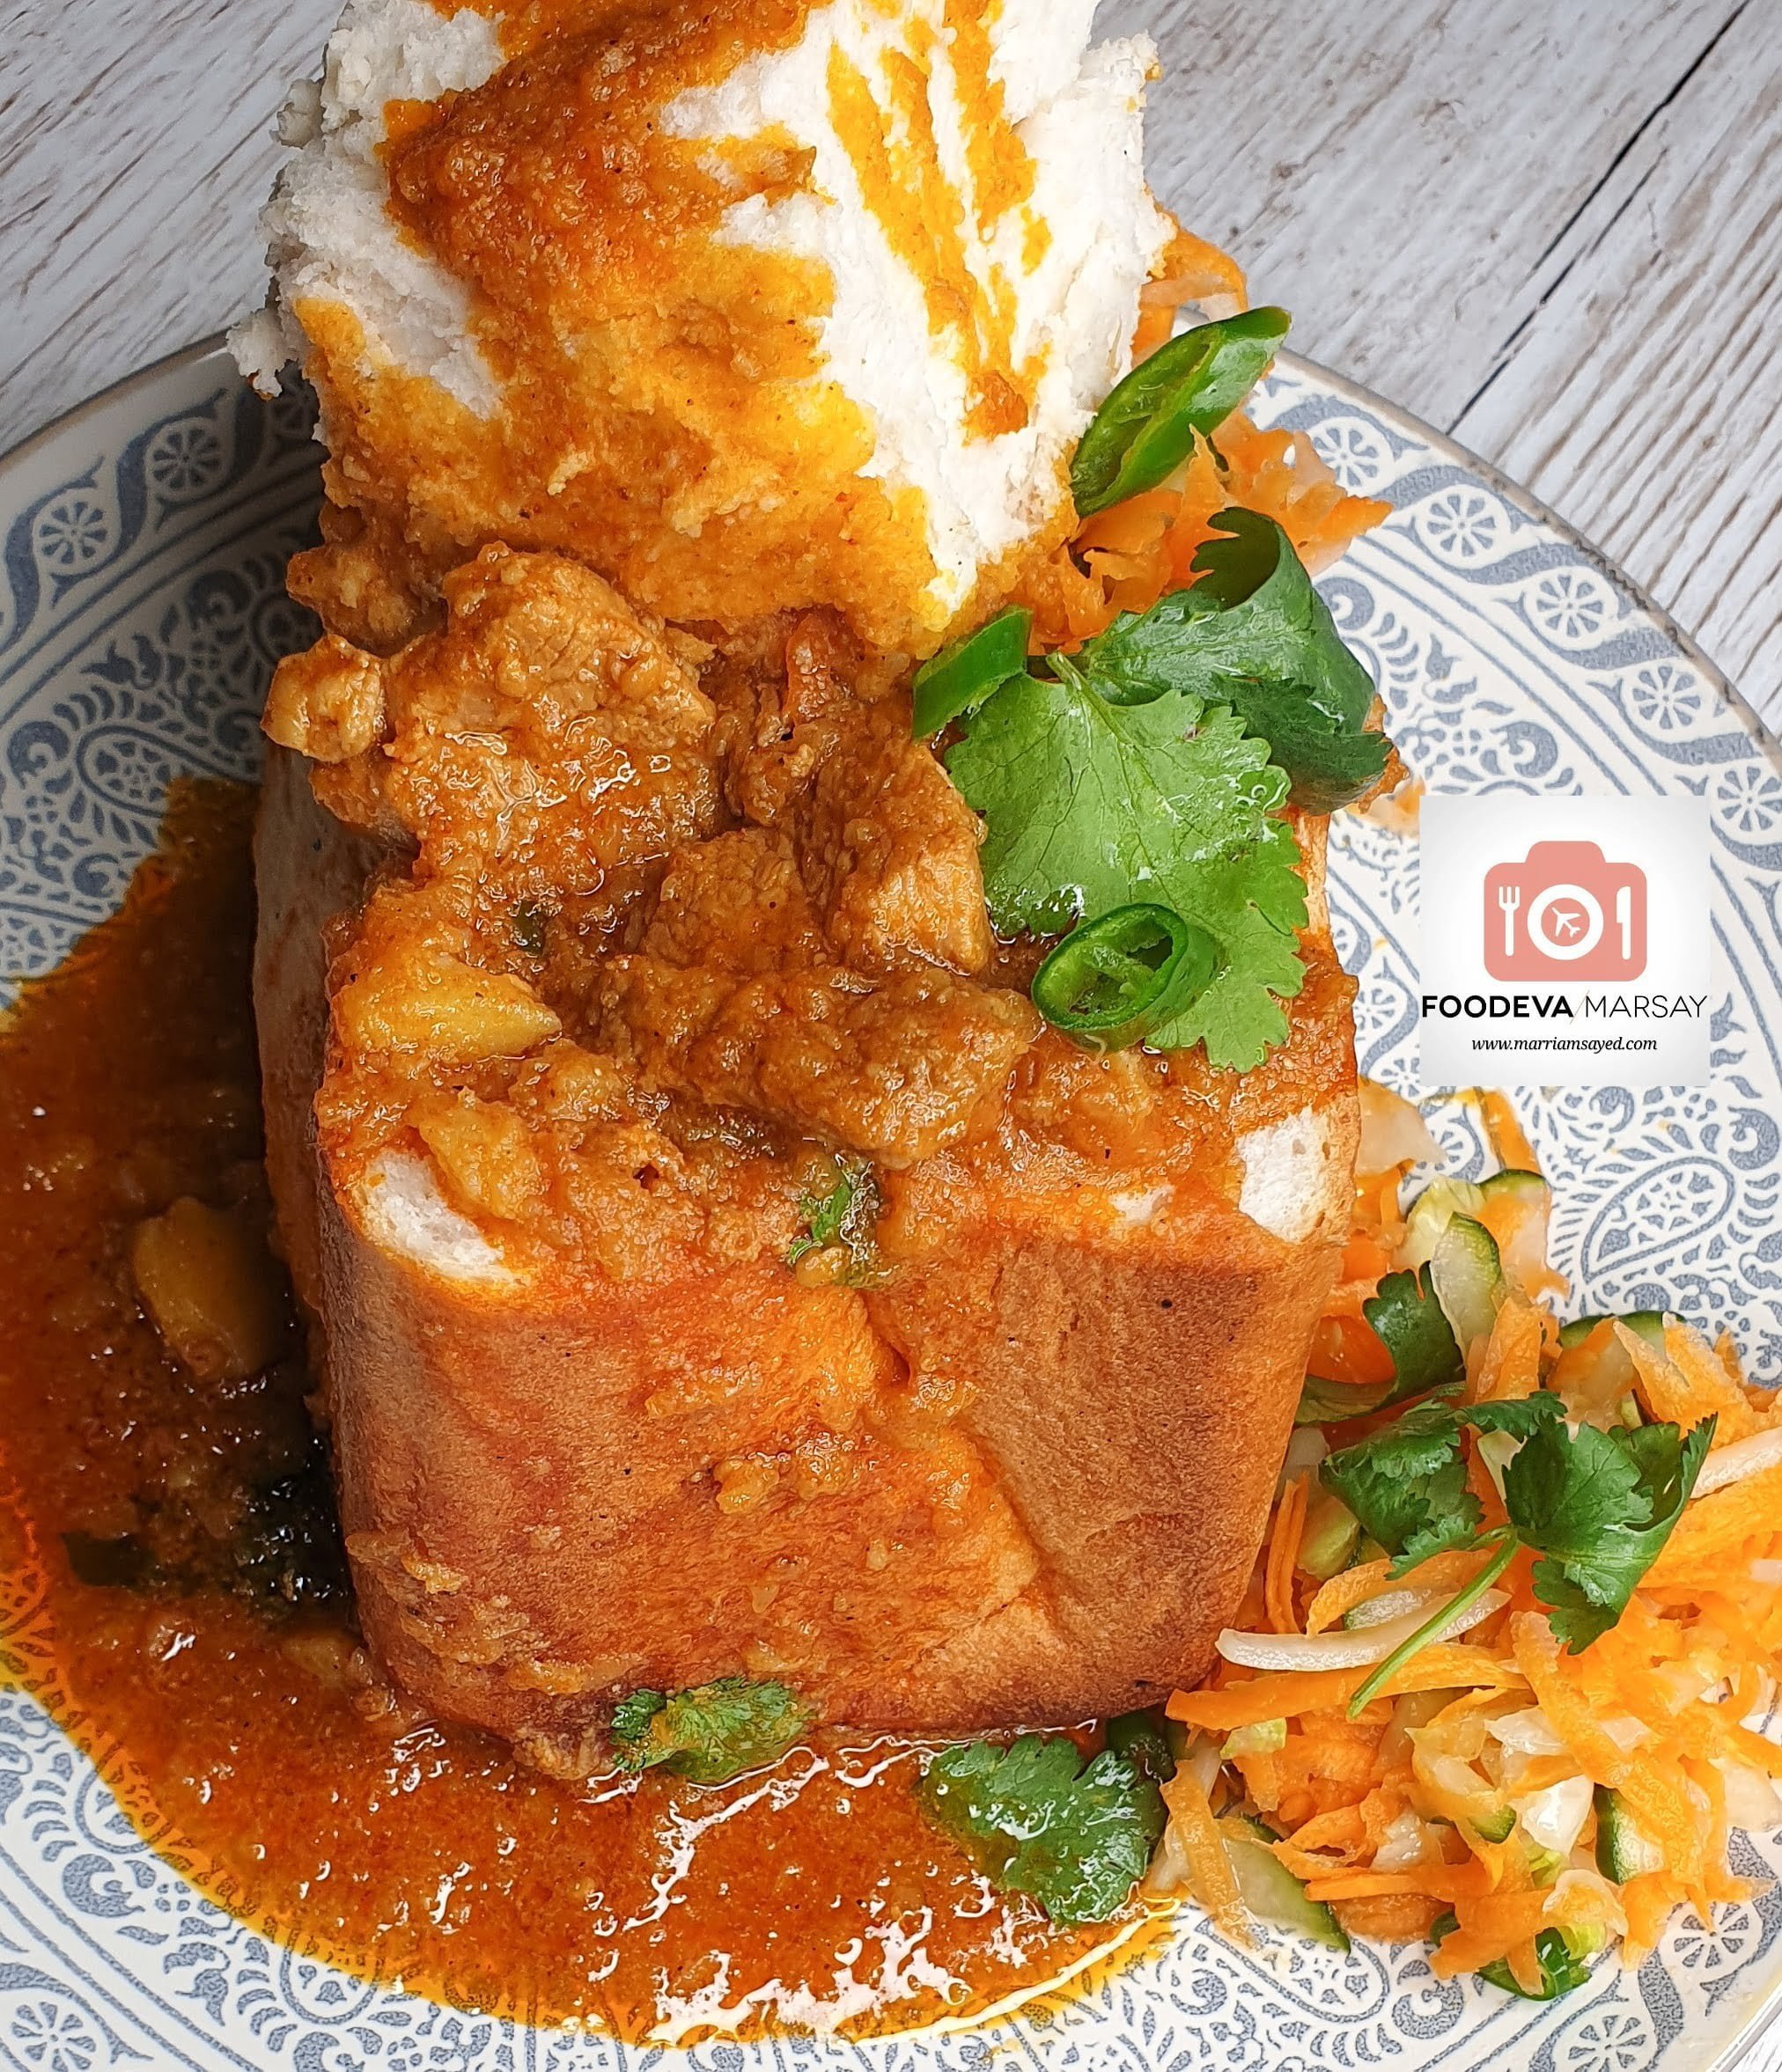 Traditional South African Bunny Chow